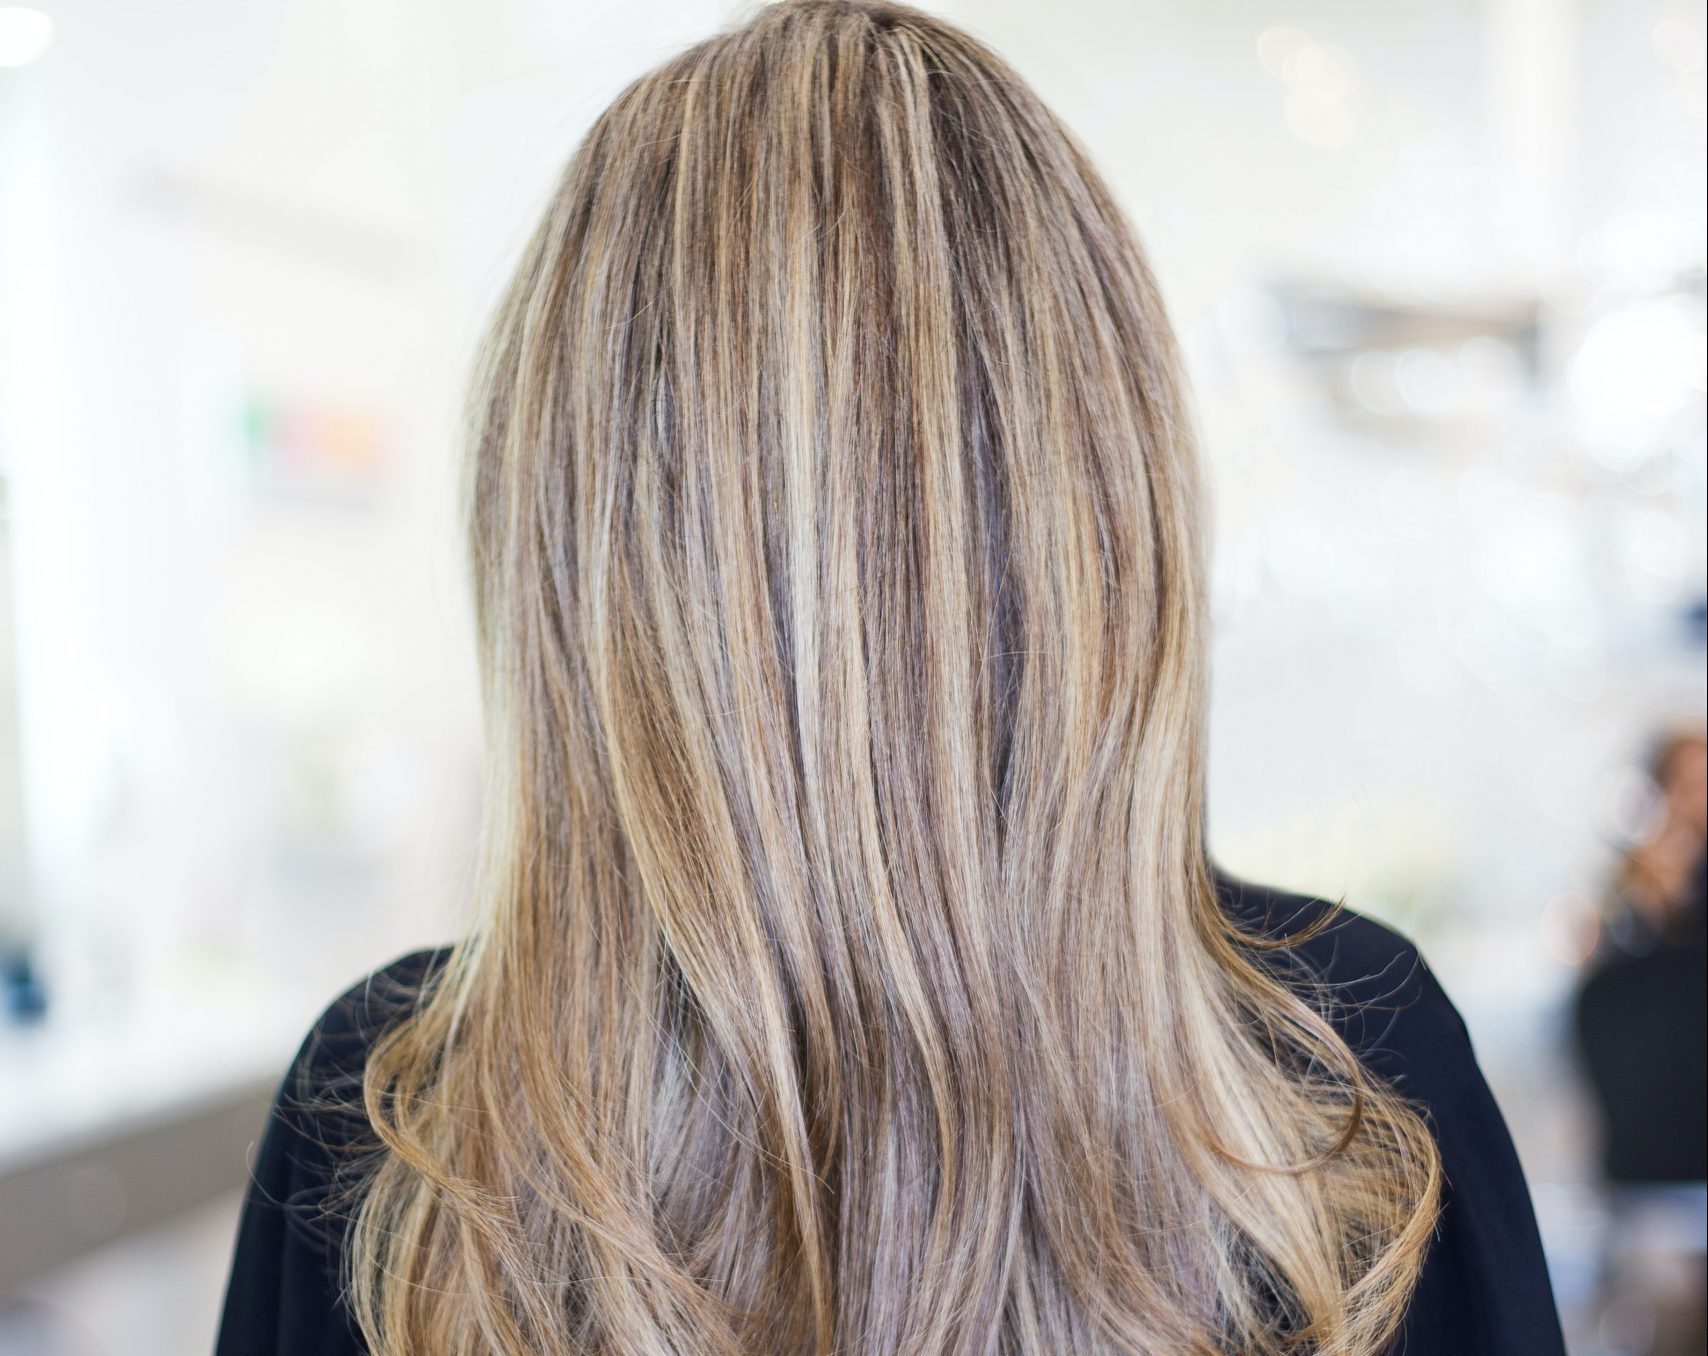 Bored At Home? Here's How To Highlight Your Hair At Home